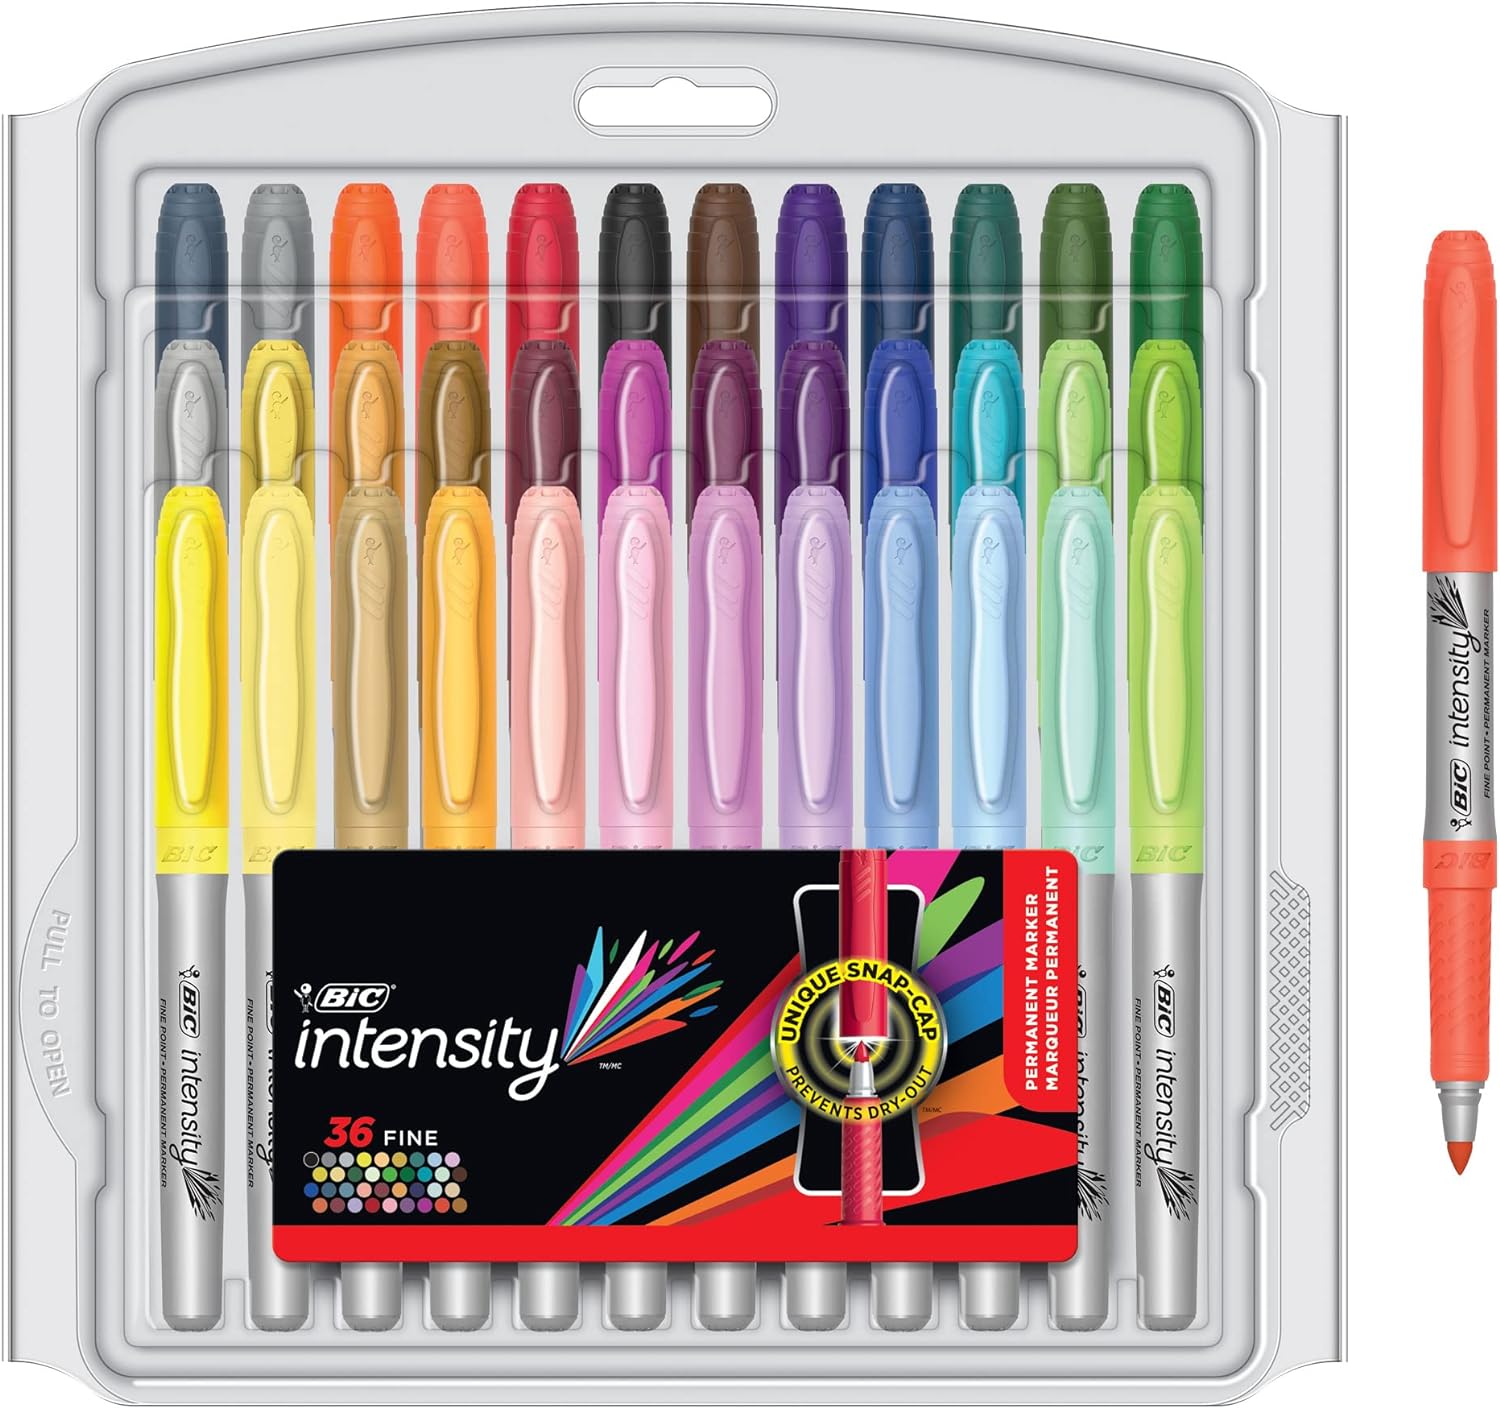 BIC Intensity Permanent Markers Fashion, Fine Point, Assorted Colors, 36-Count Pack, Ballpoint Pens for School and Office Supplies (GXPMP361-AST)